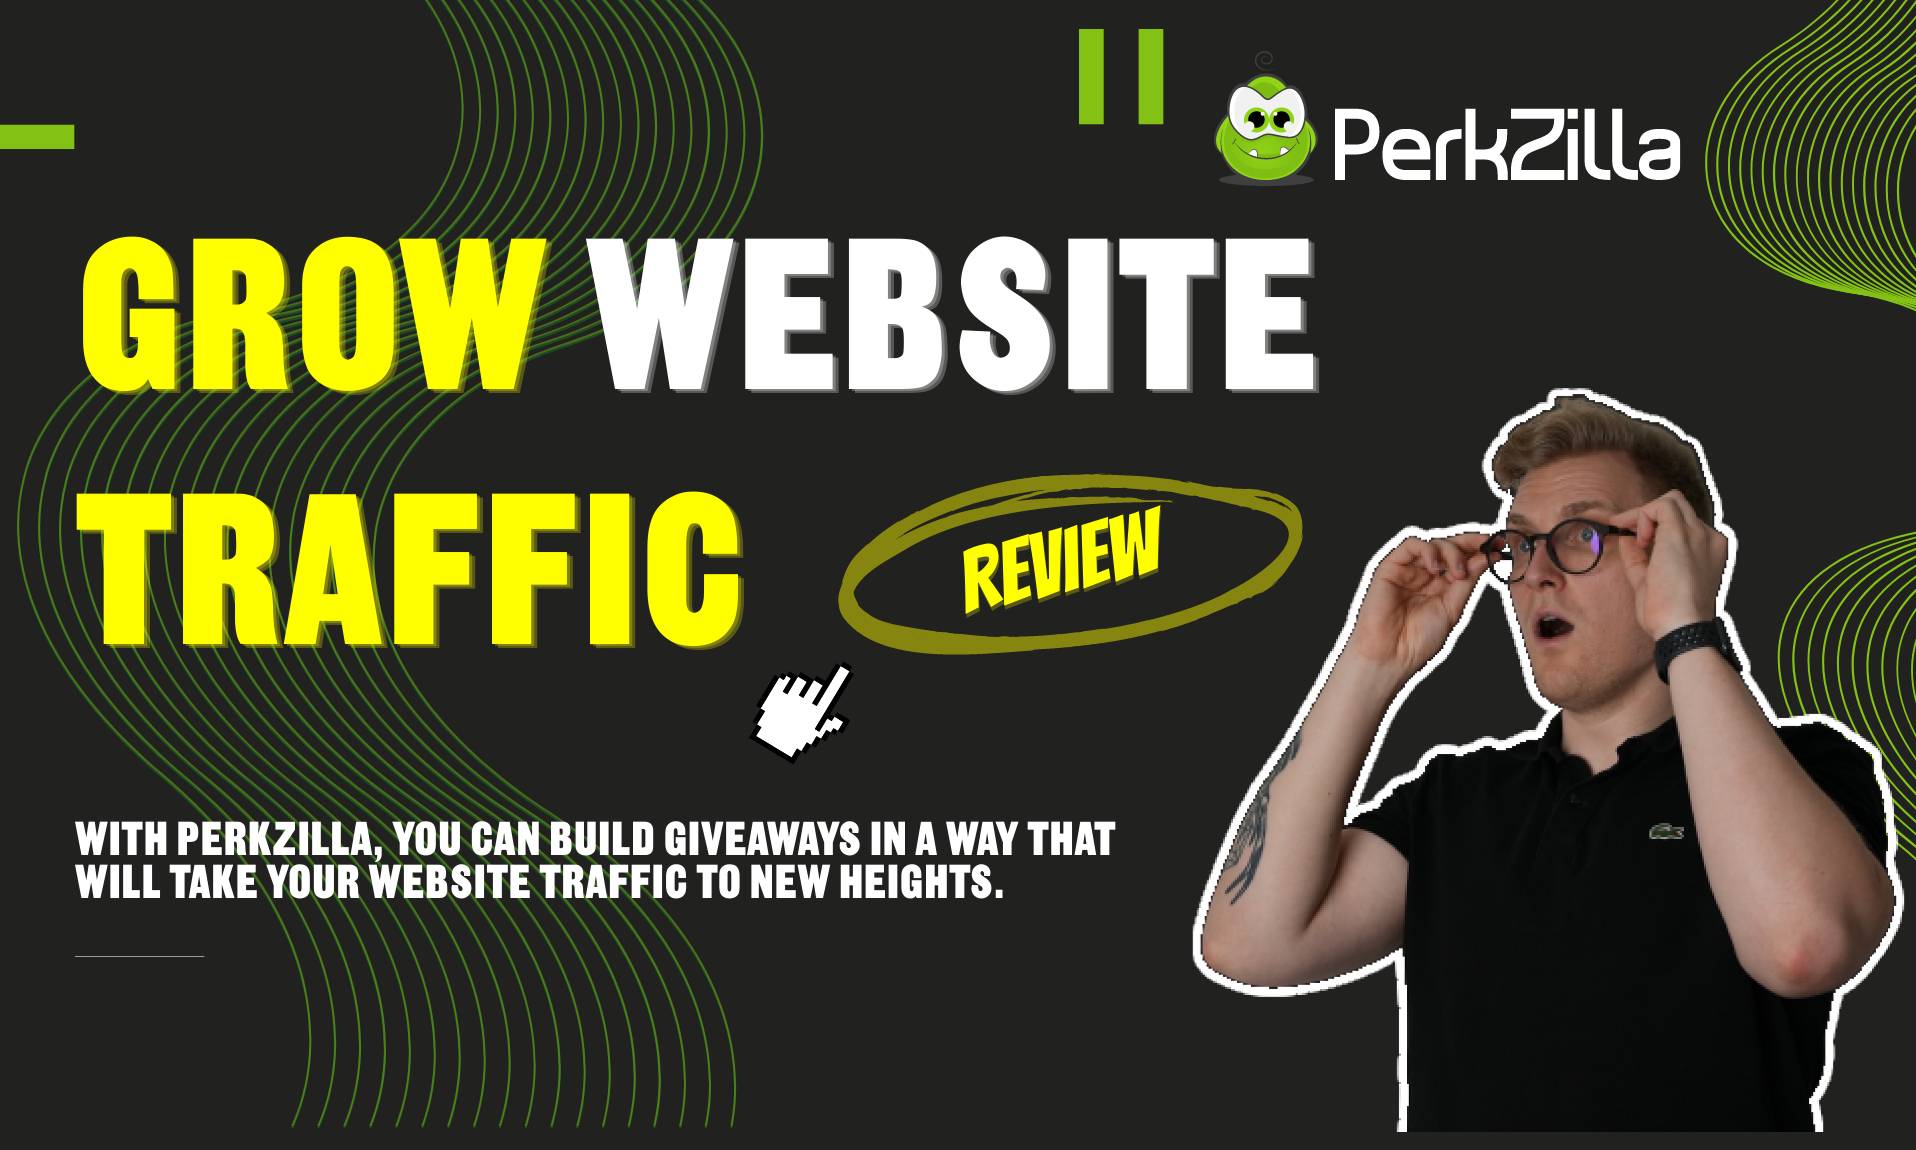 Perkzilla review - Build giveaways, contests and drive traffic to your website